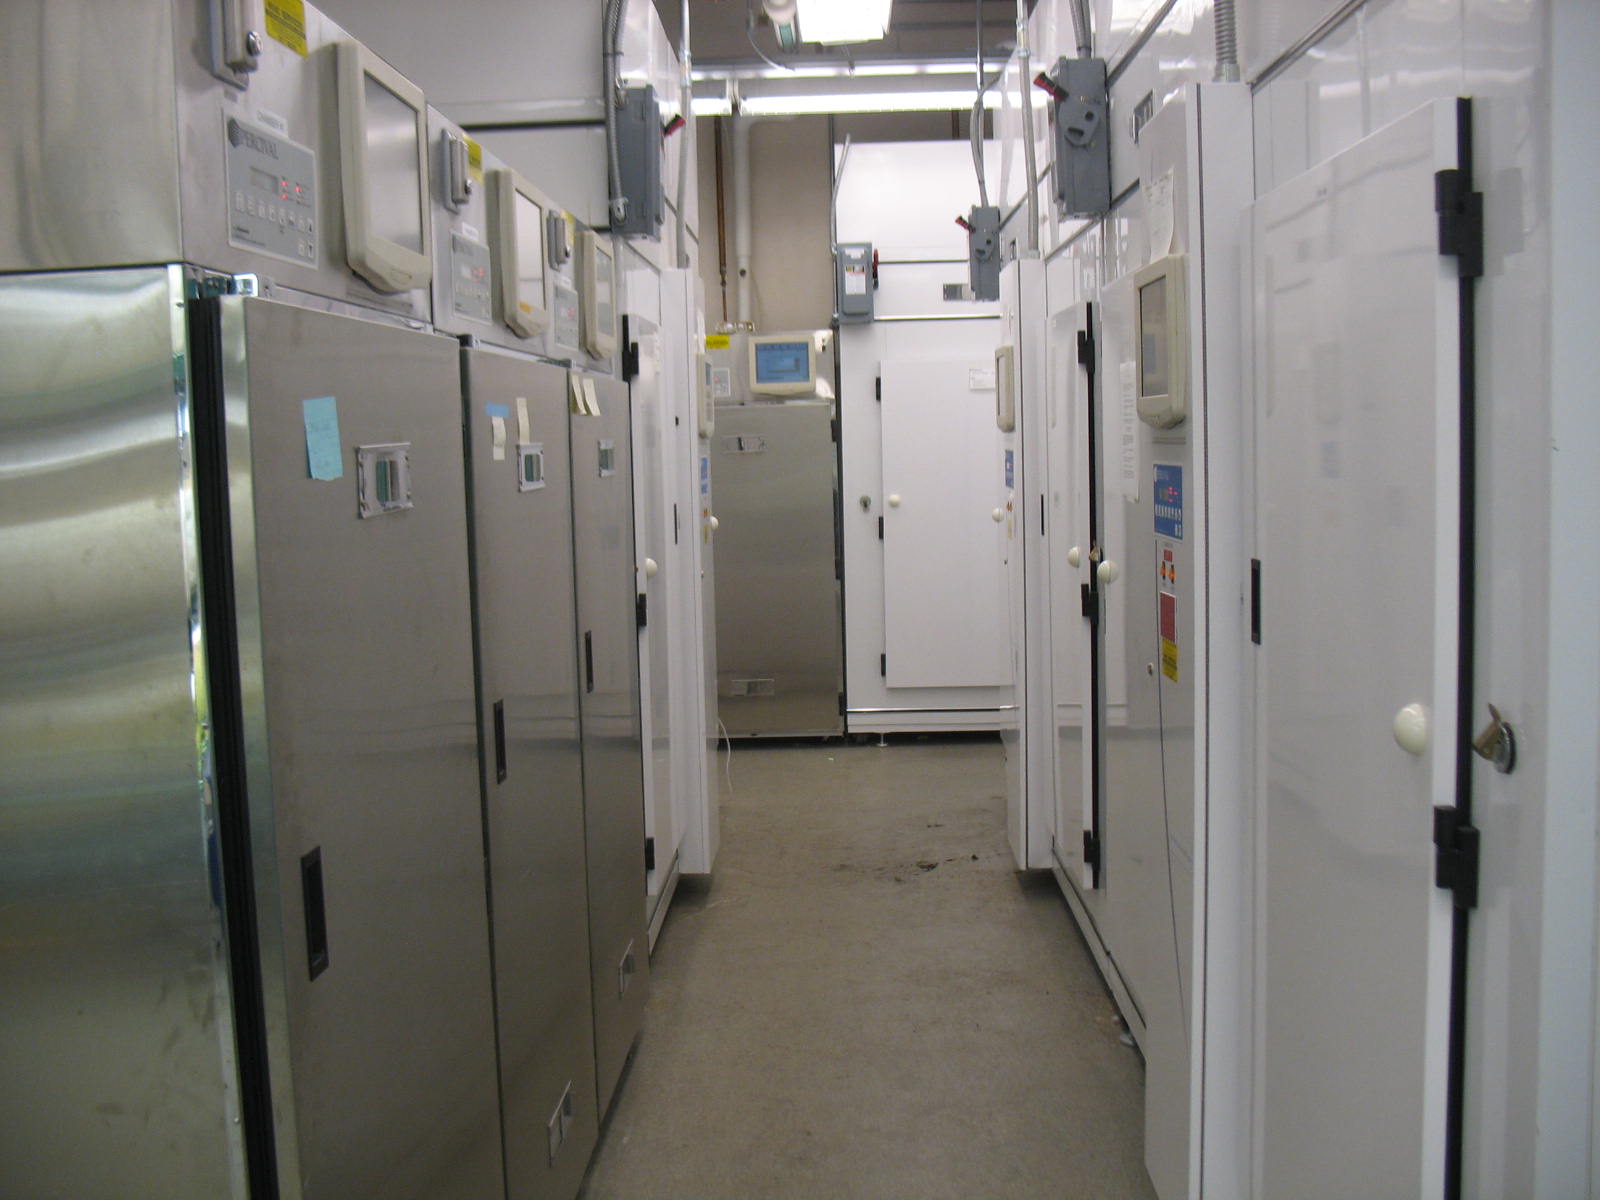  Graduate student also have access to growth chambers and other equipment that facilitate their work. 